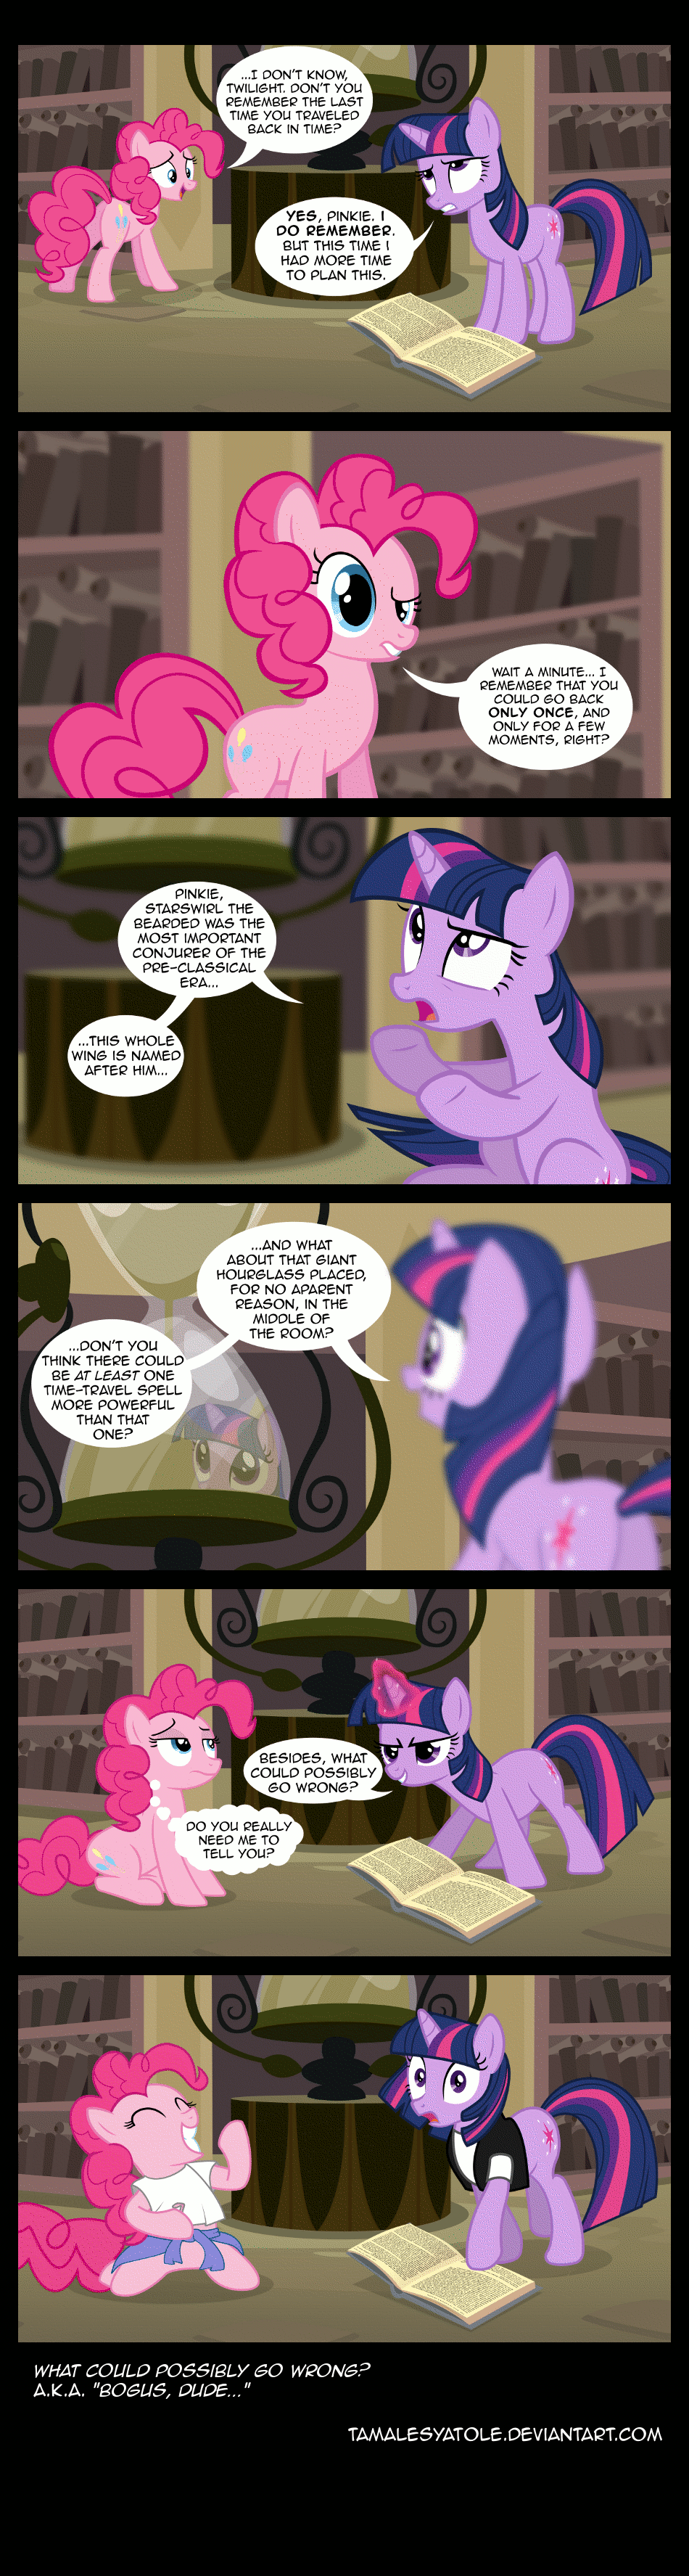 what_could_possibly_go_wrong__by_tamales